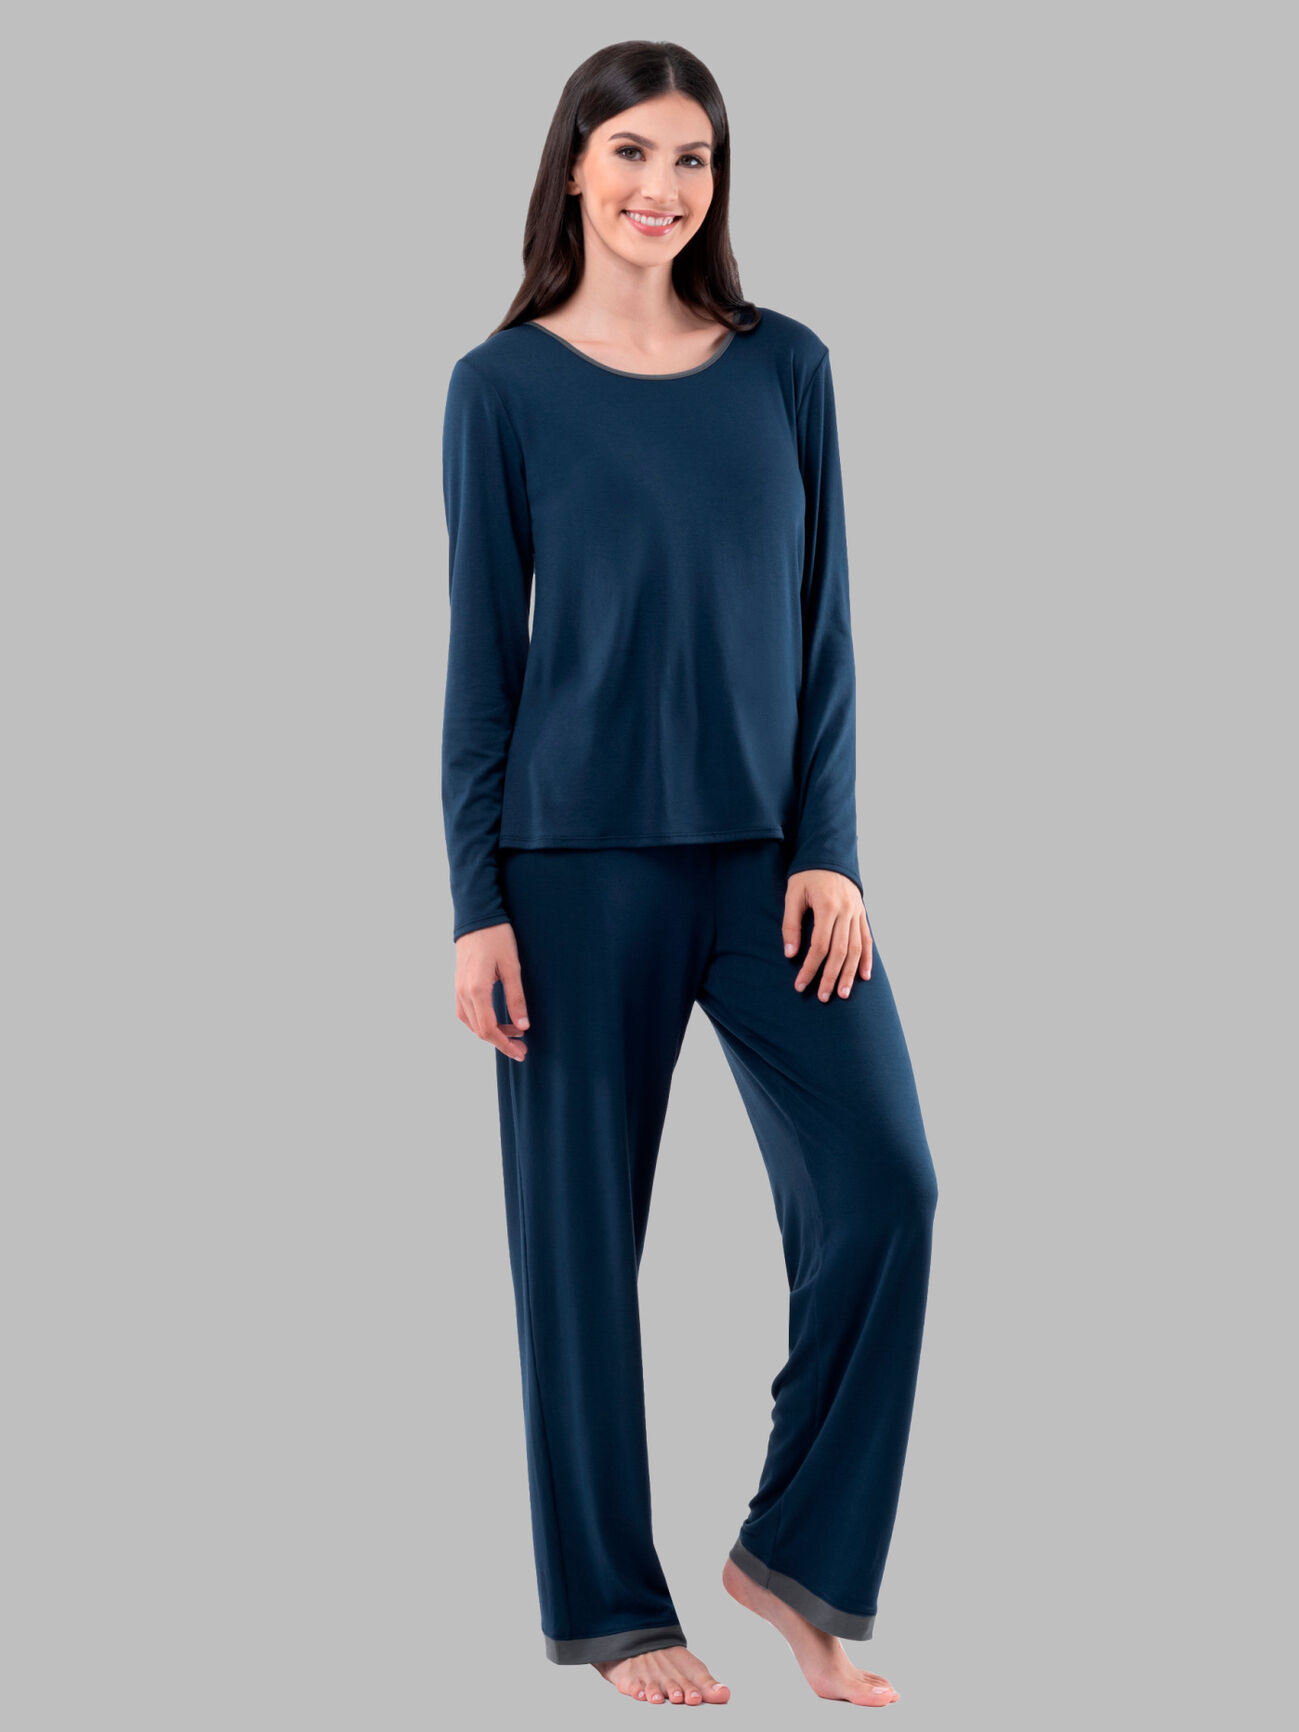 Women's Soft & Breathable Crew Neck Long Sleeve Shirt and Pants